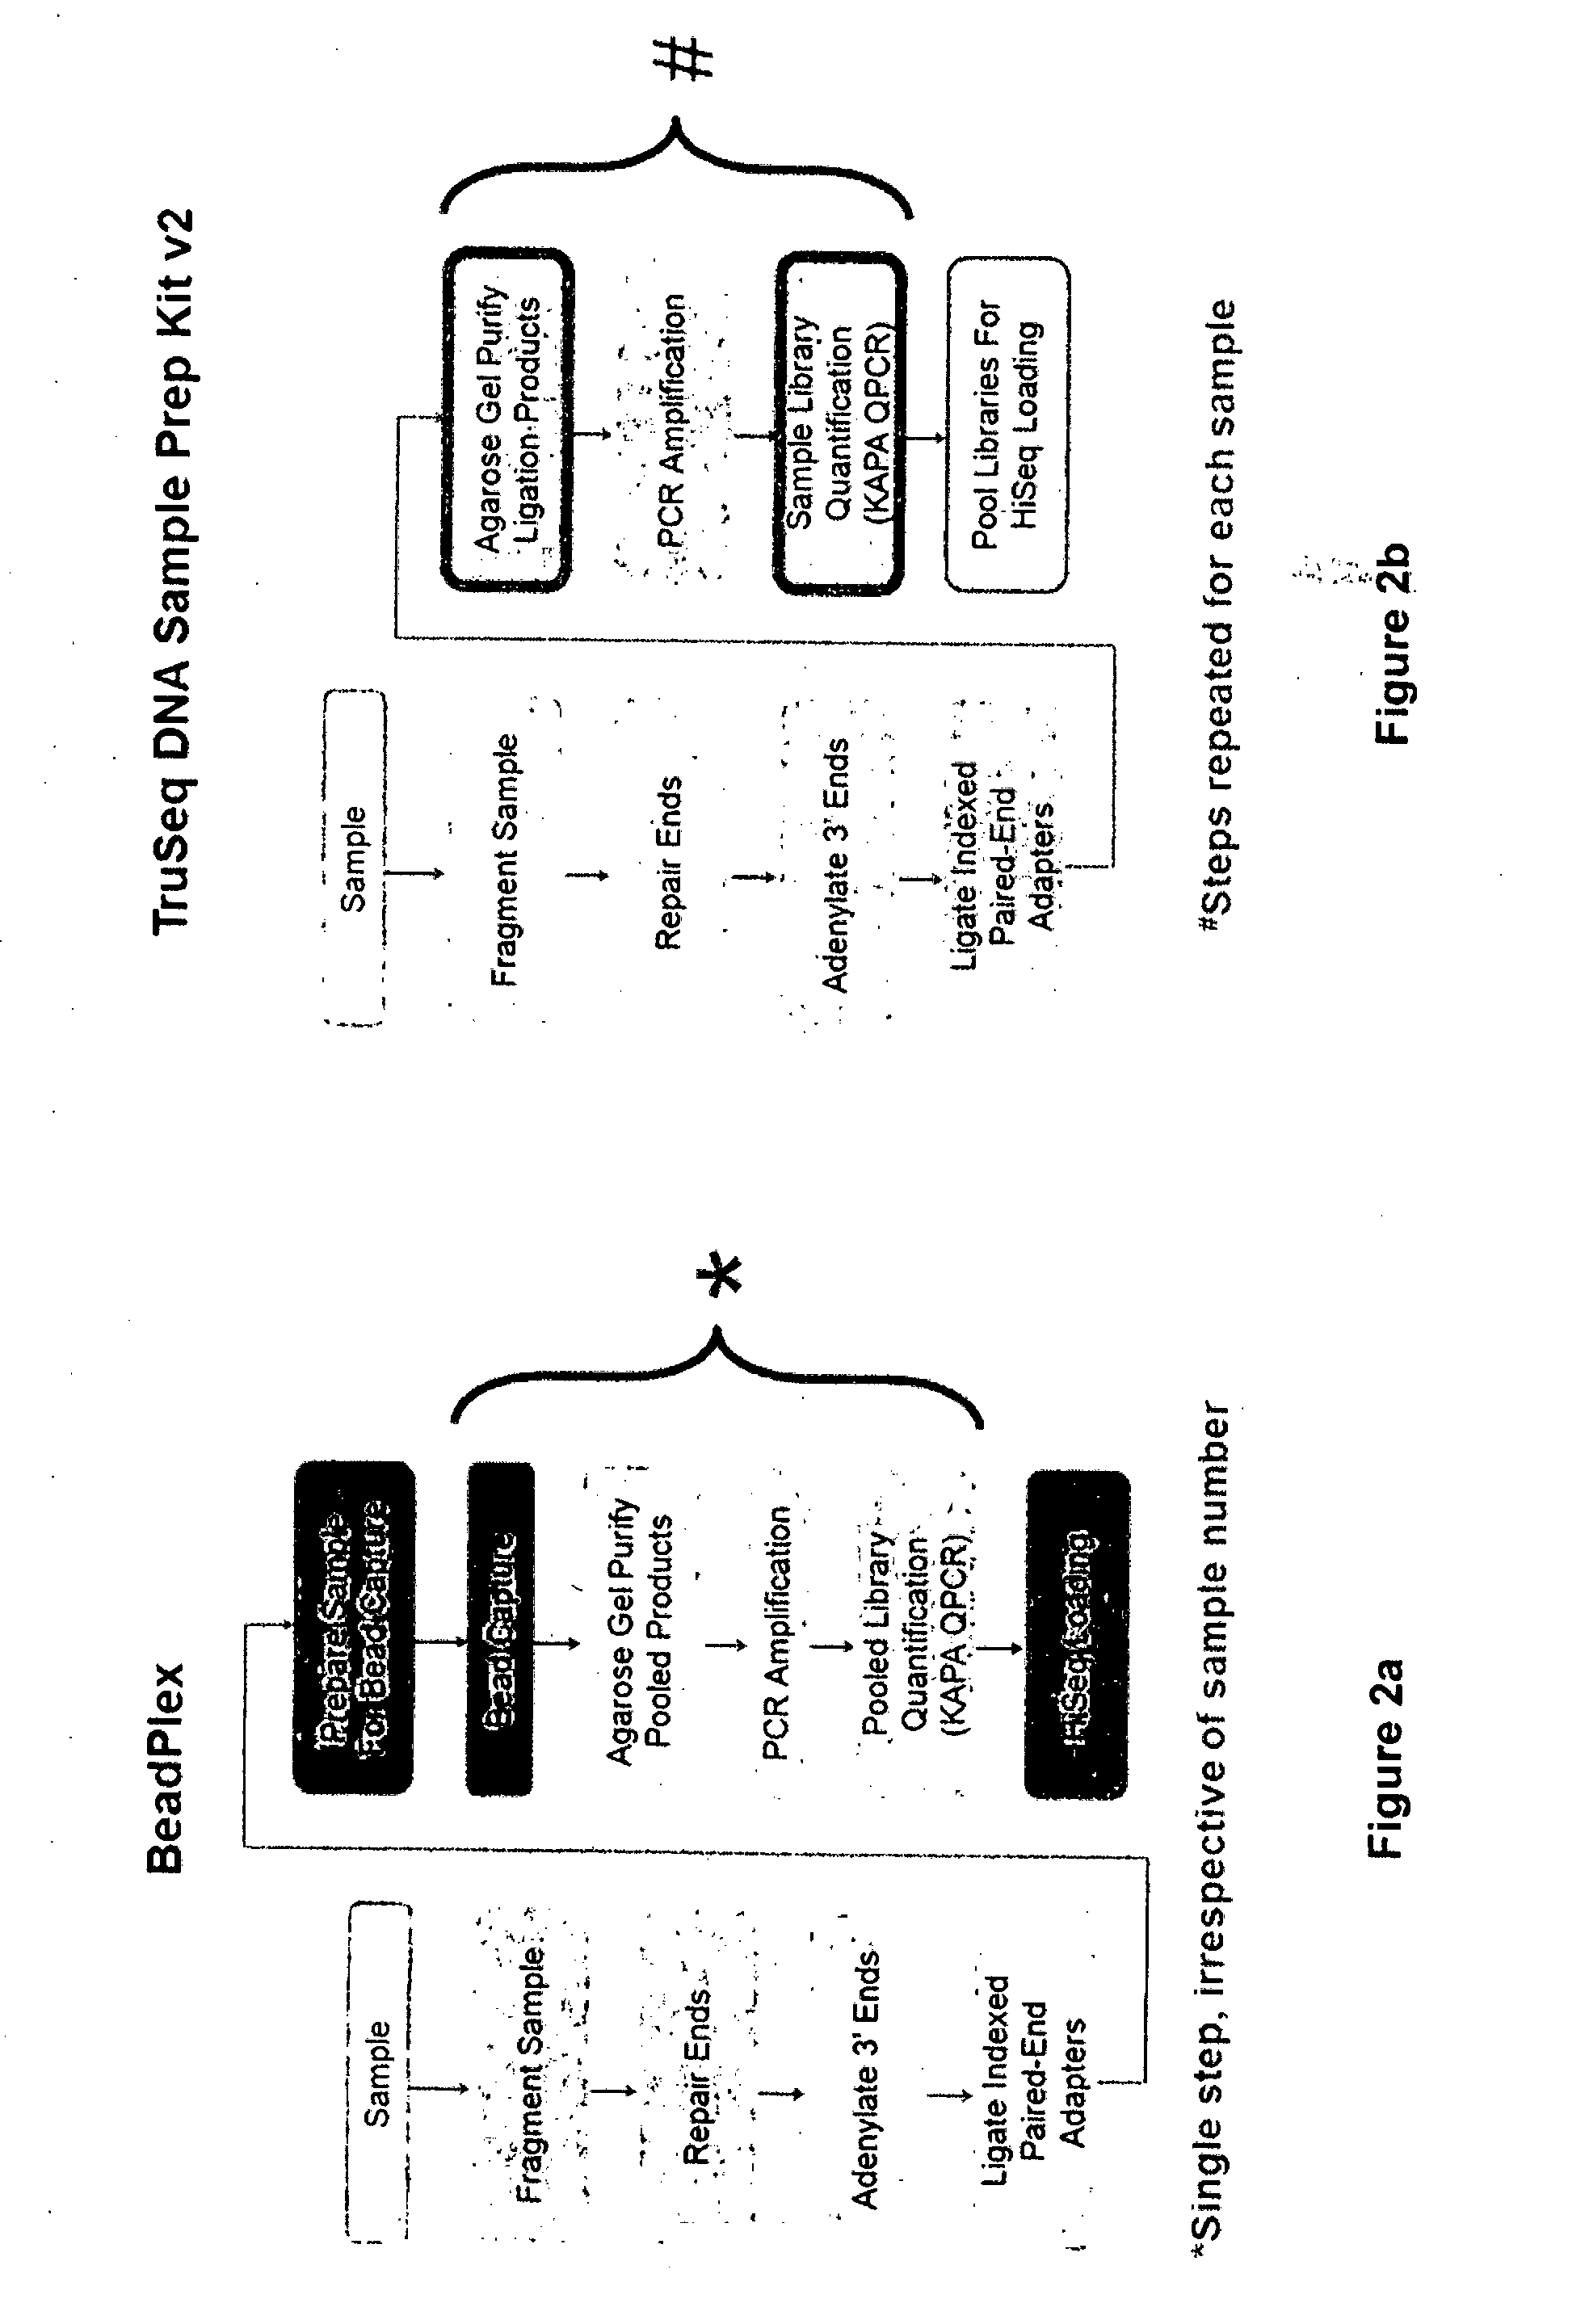 Method of Producing a Normalised Nucleic Acid Library Using Solid State Capture Material